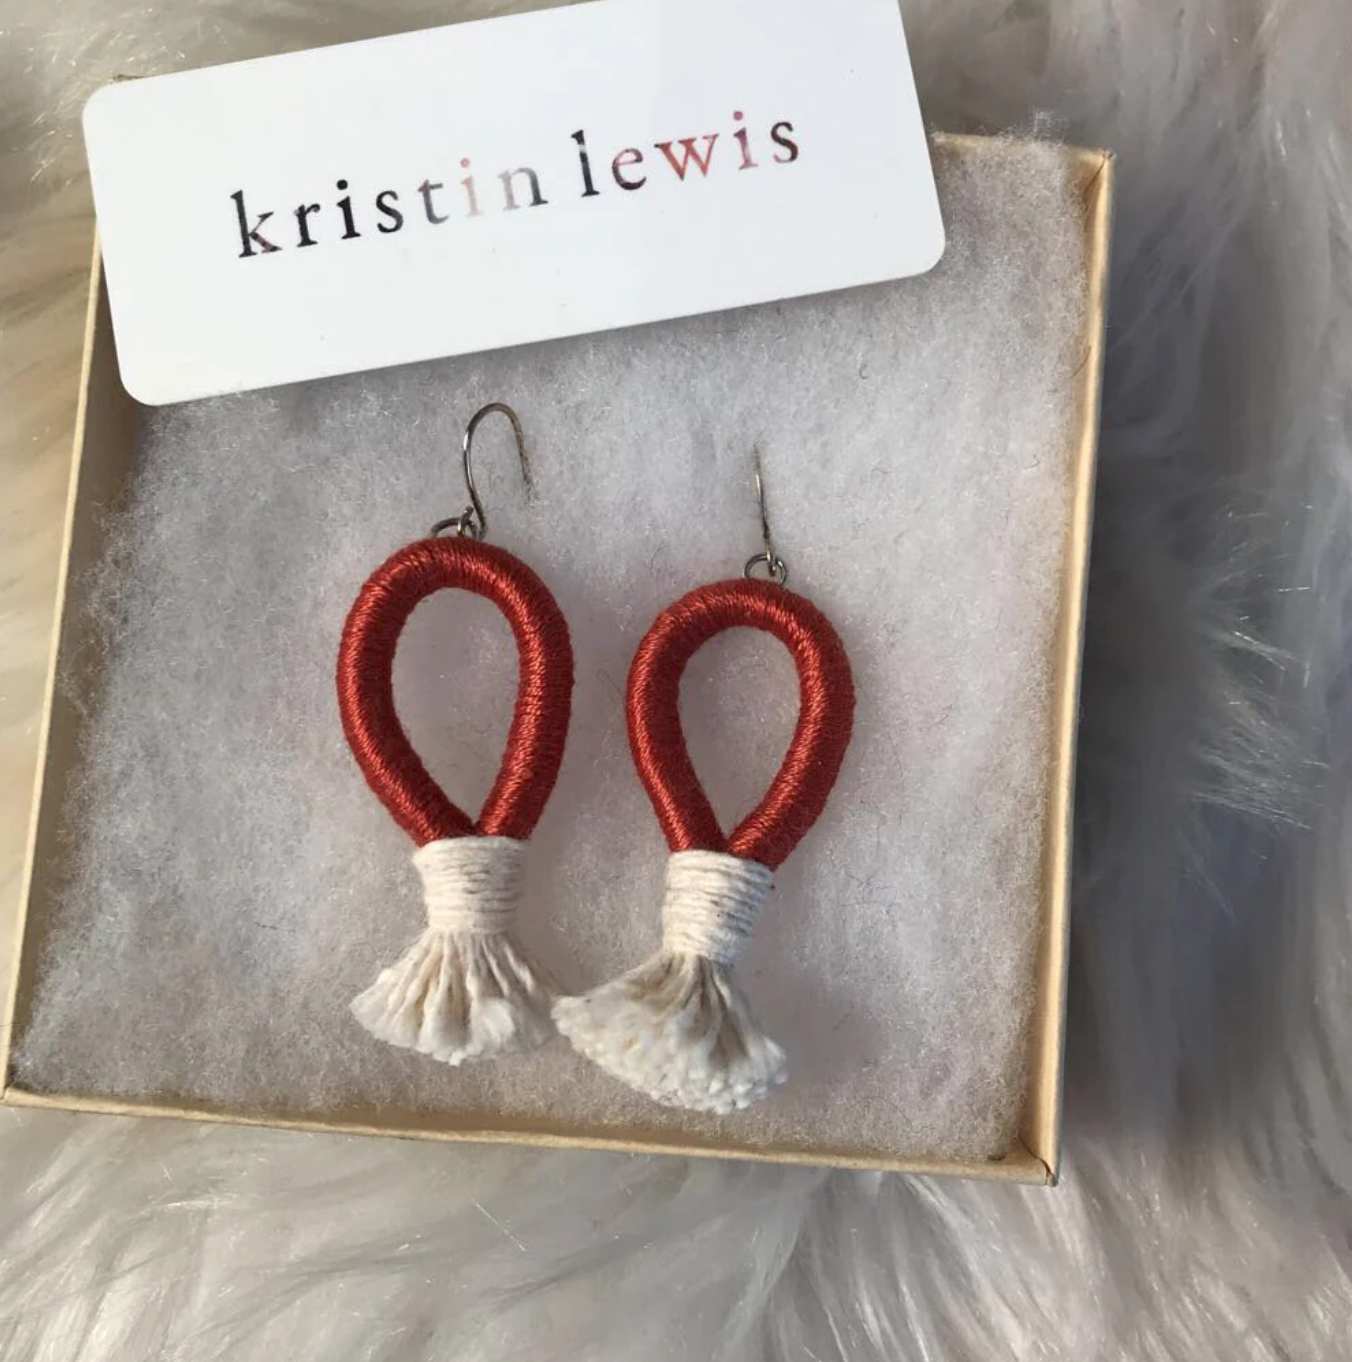 textile loop-shaped earrings made by kristin lewis design